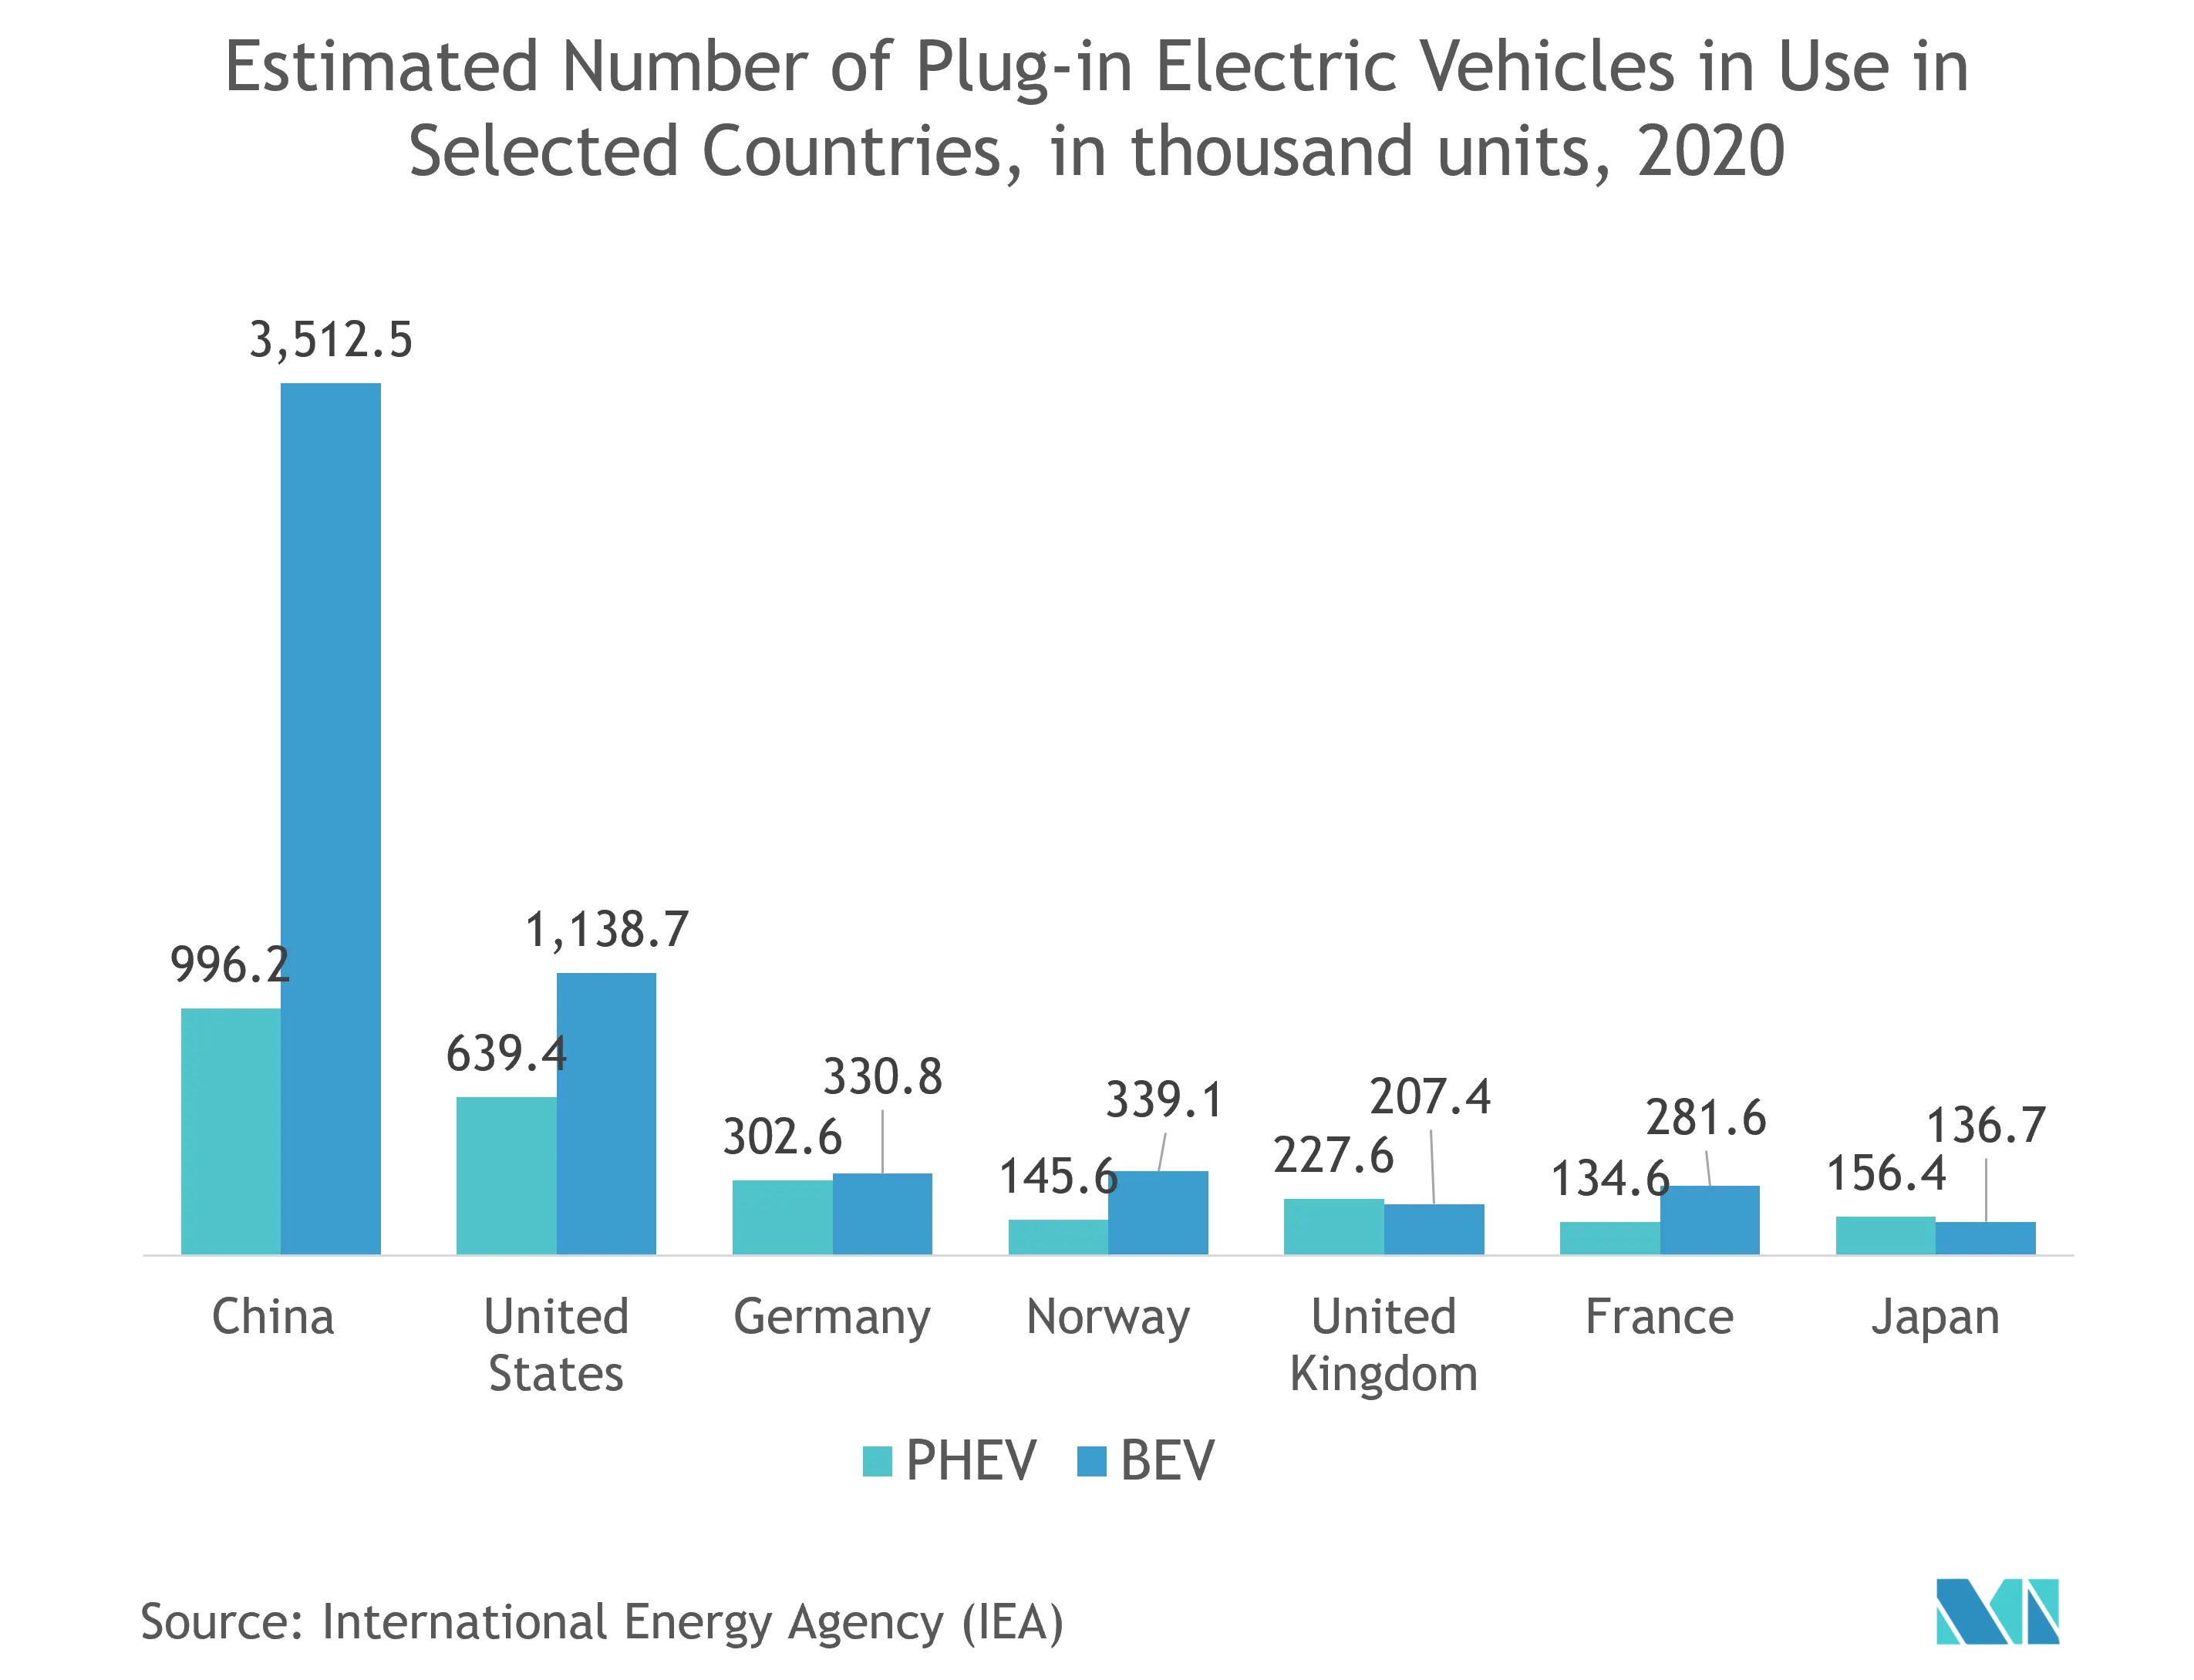 Torque Sensor Market: Estimated Number of Plug-In Electric Vehicles in Use in Selected Countries, In thousand unless, 2020